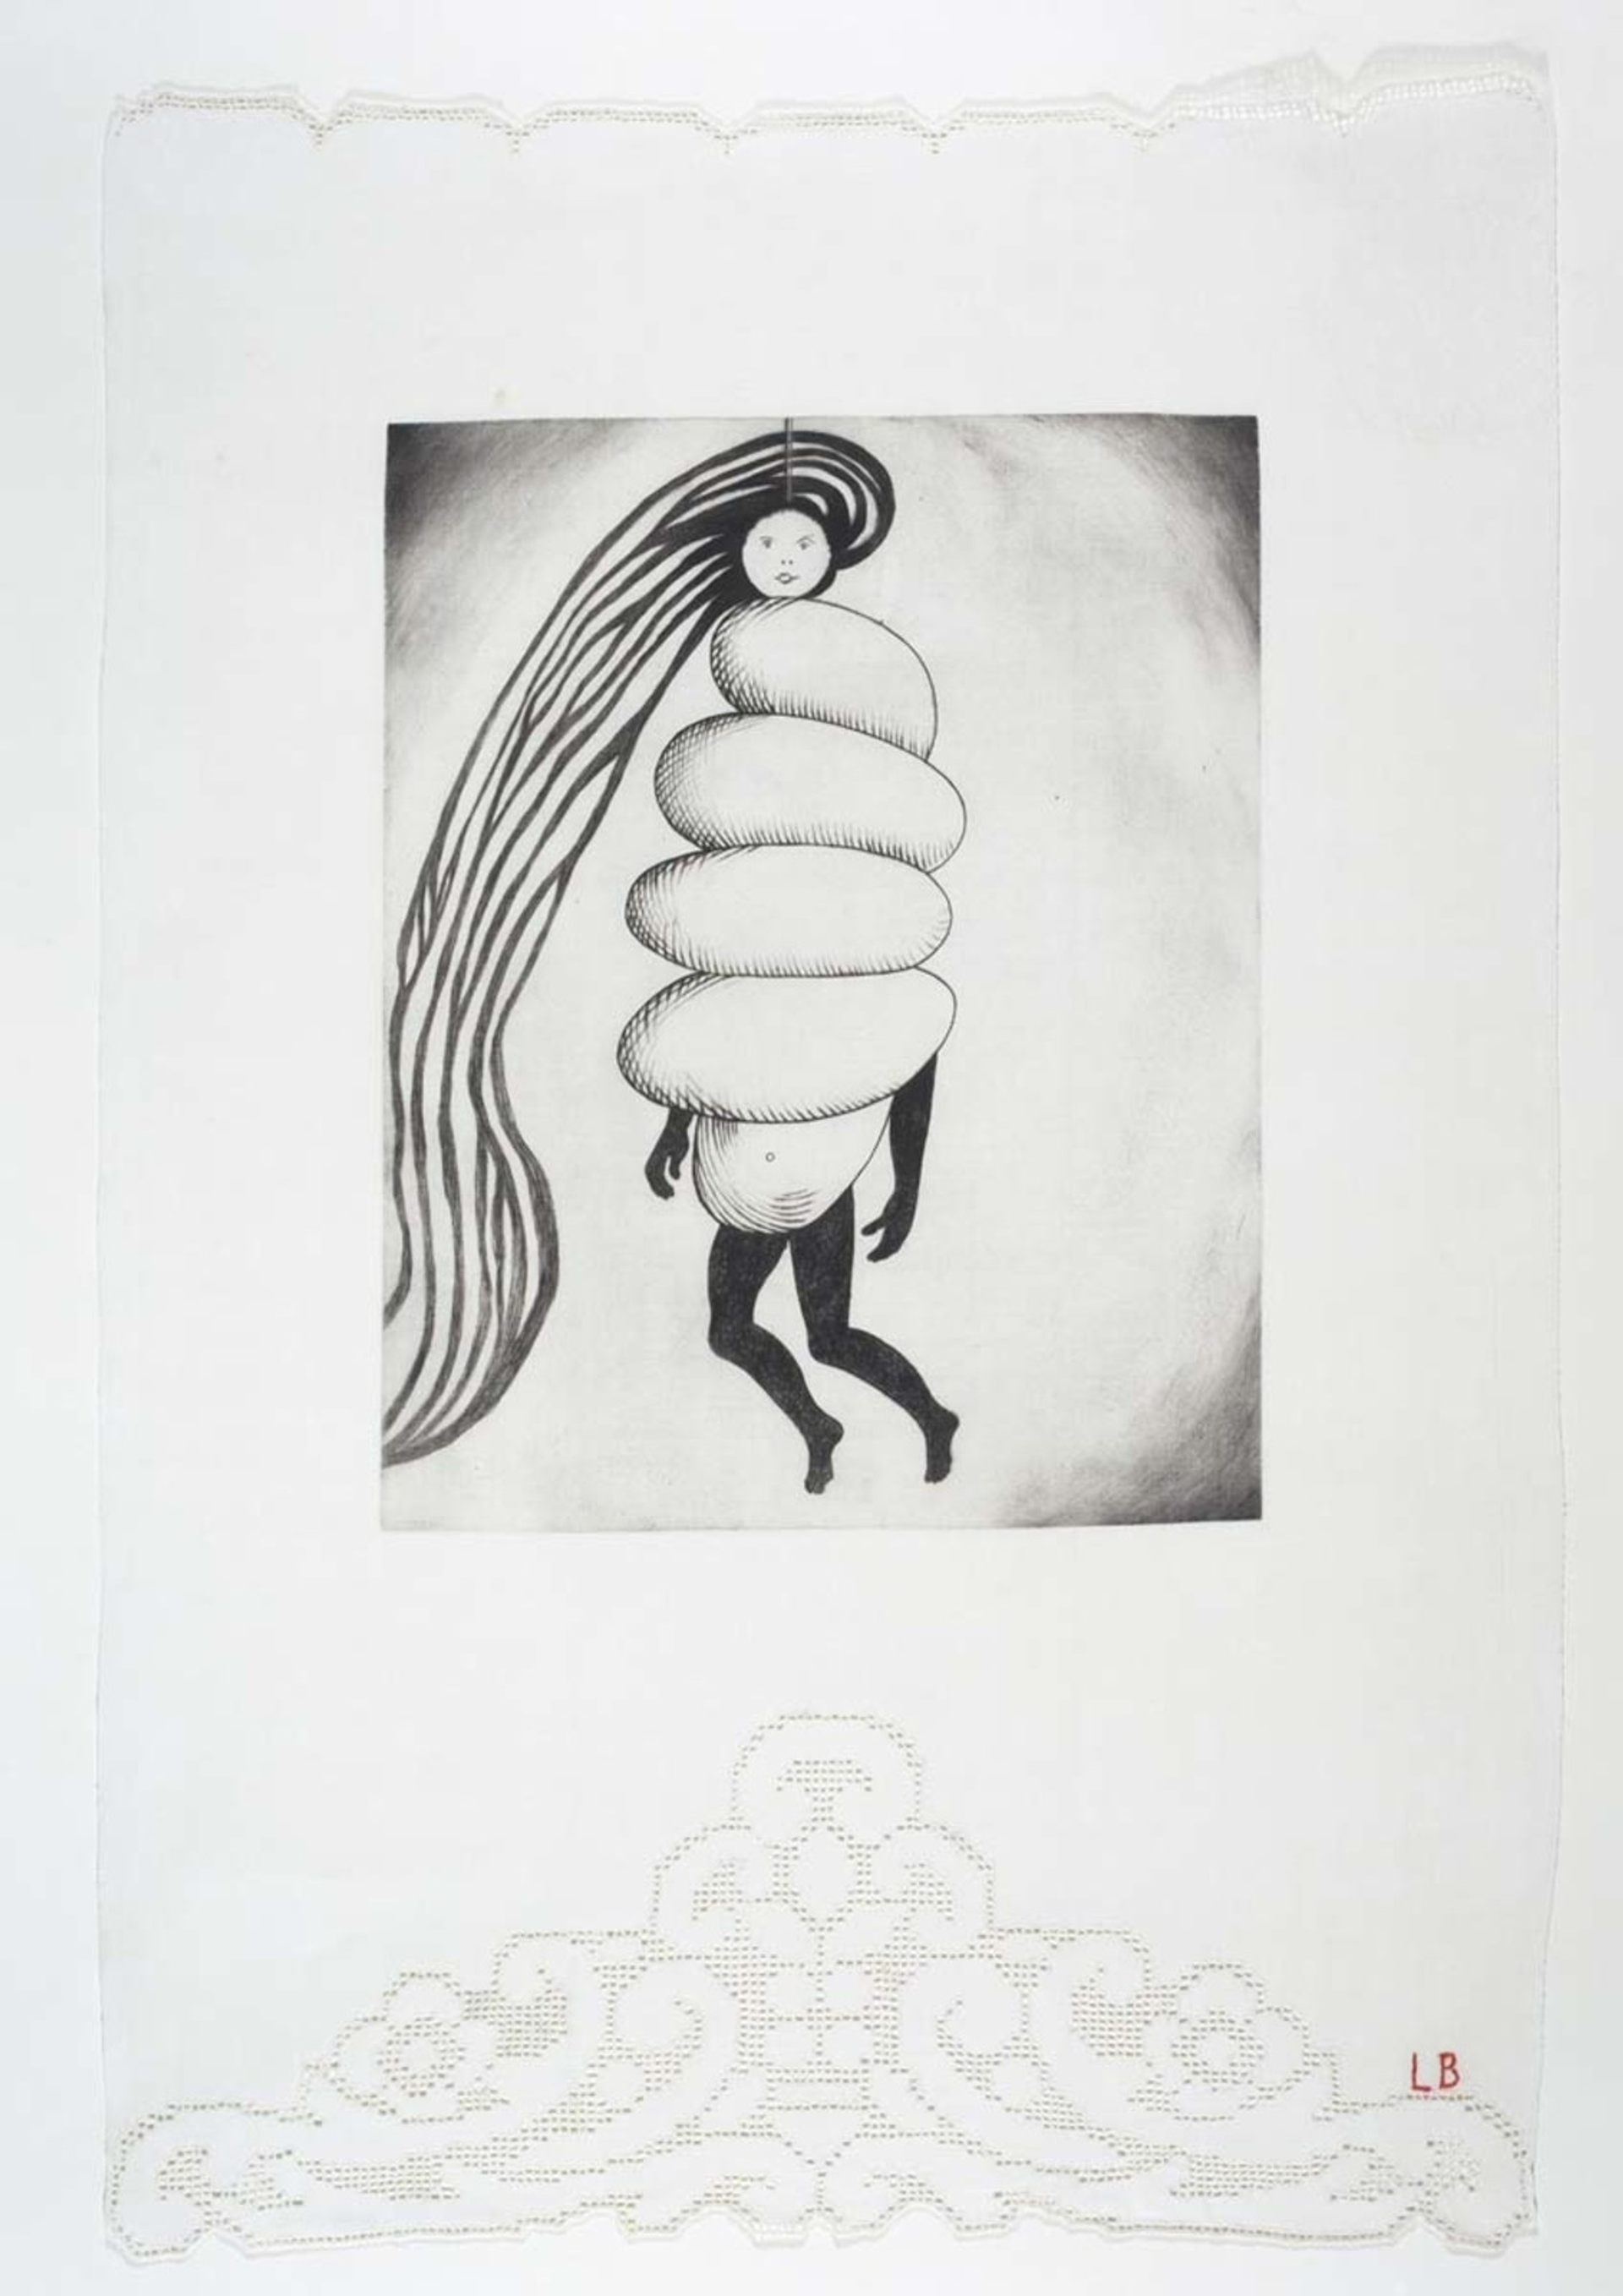 Print of Louise Bourgeois’ Spiral Woman. A black and white sketch of a woman whose hair is as long as her height appears to be floating. An object or fabric is spiralling around her